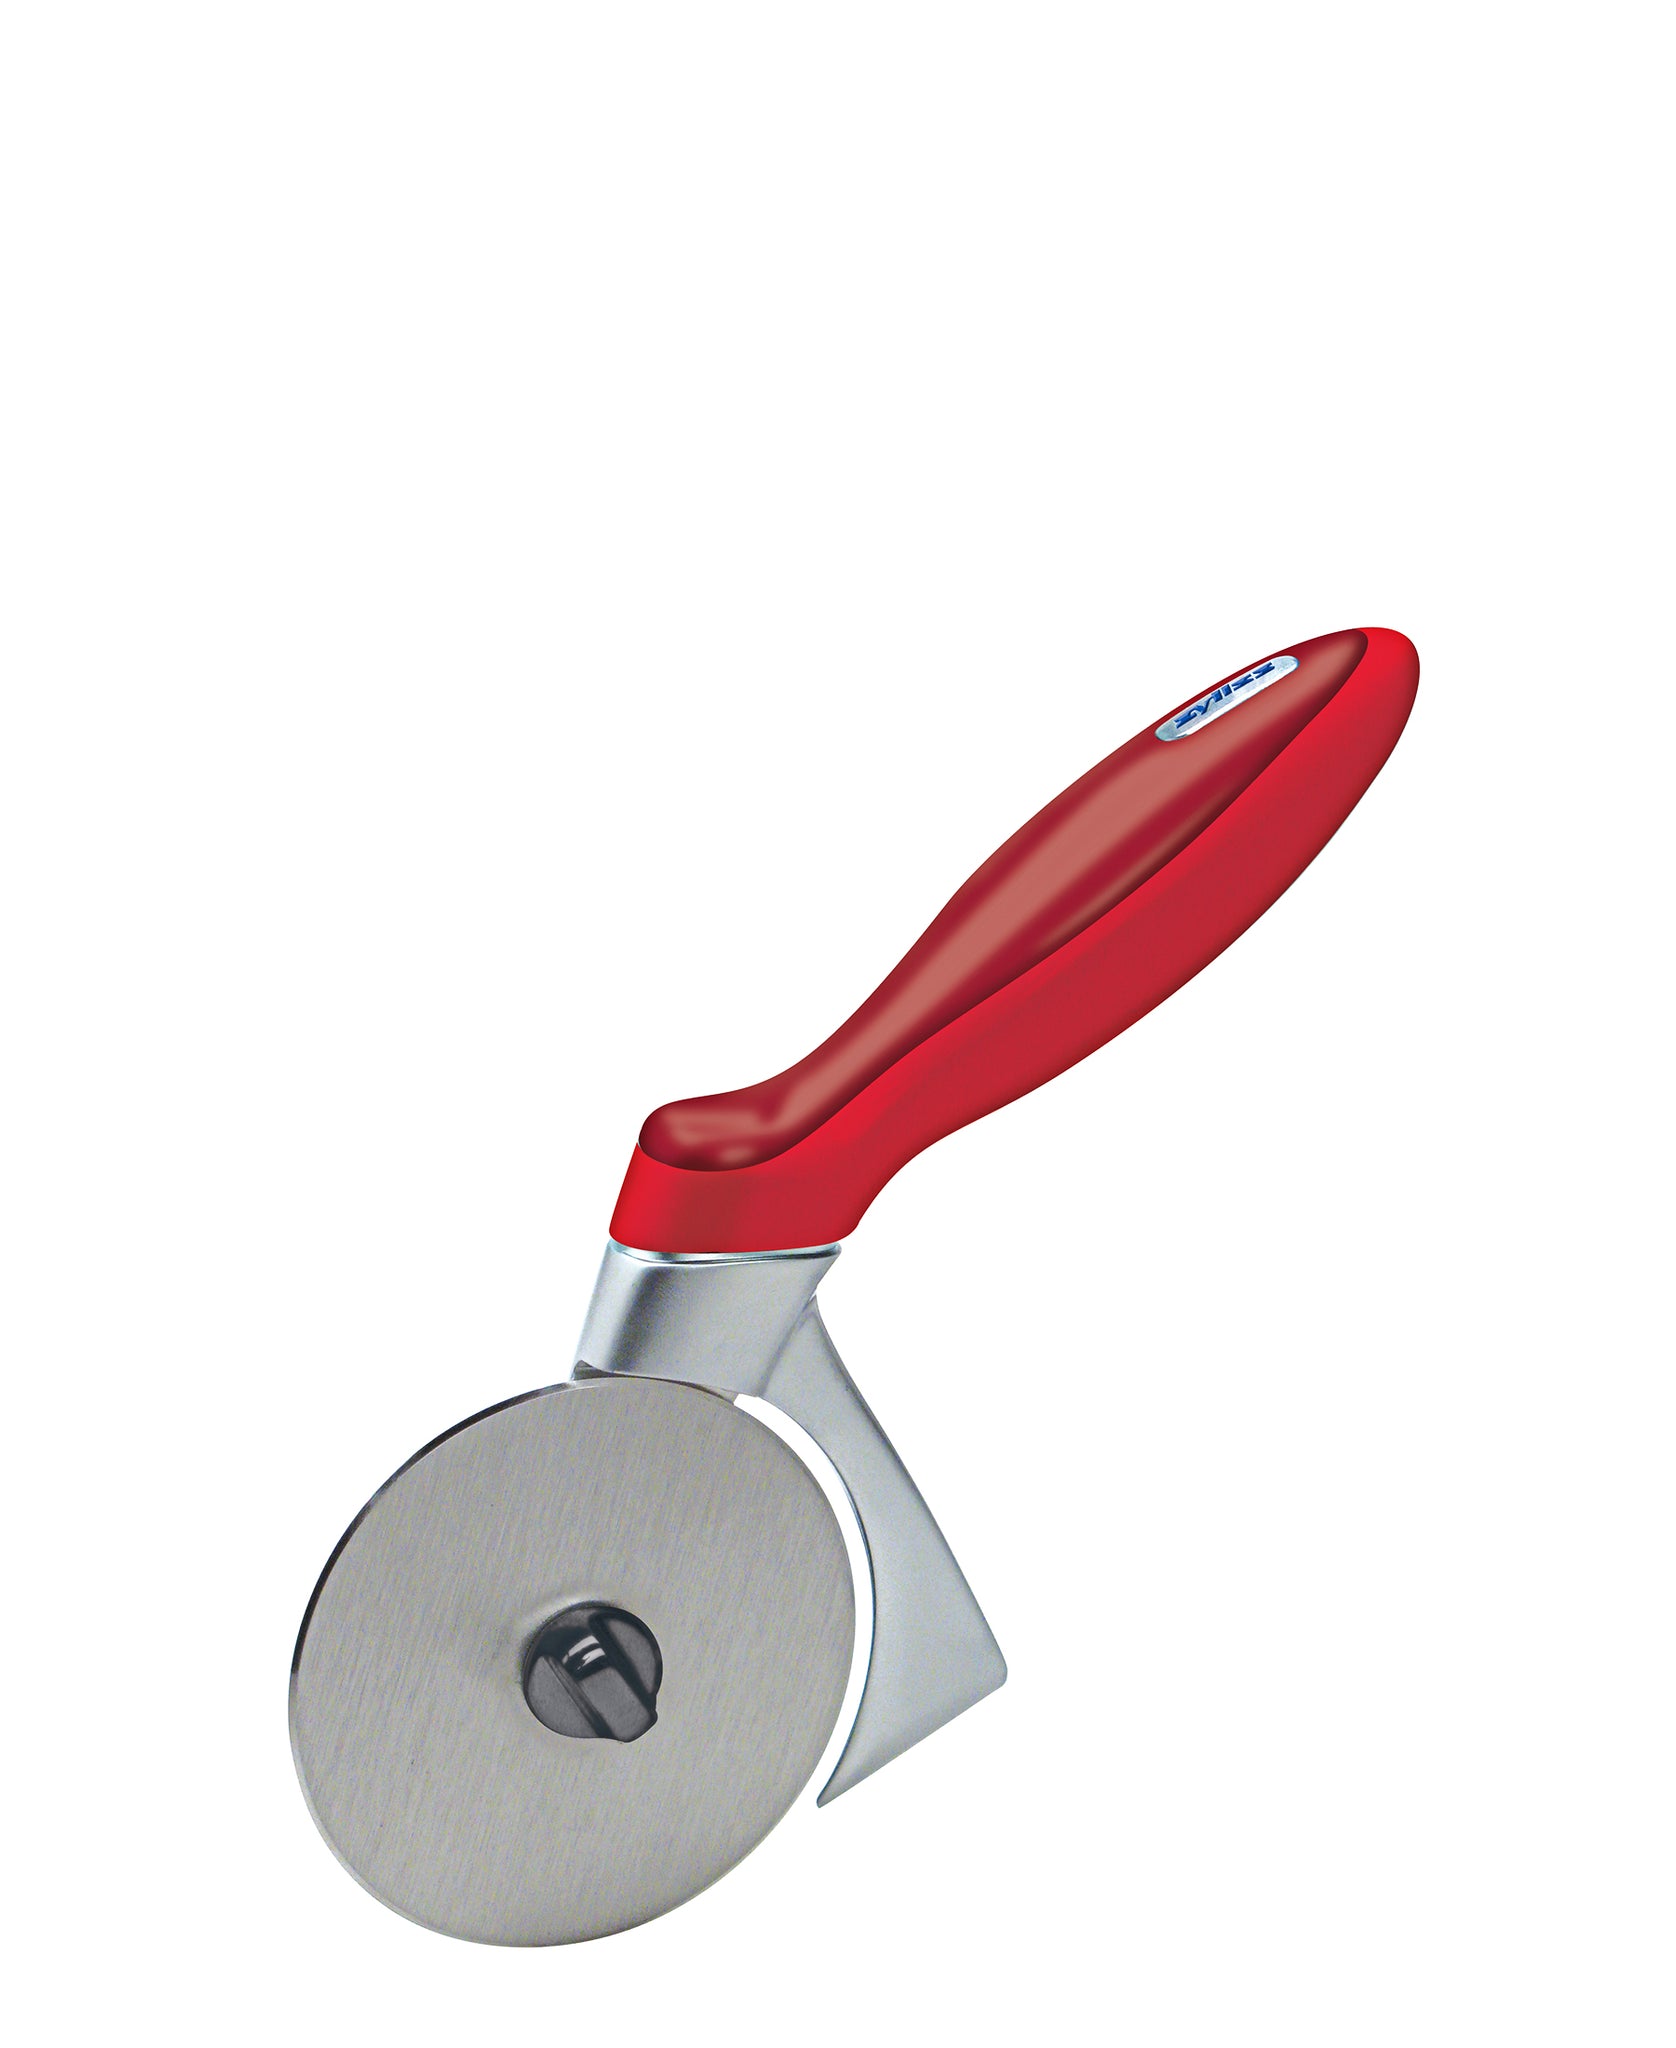 Zyliss Pizza & Pastry Cutter - Red